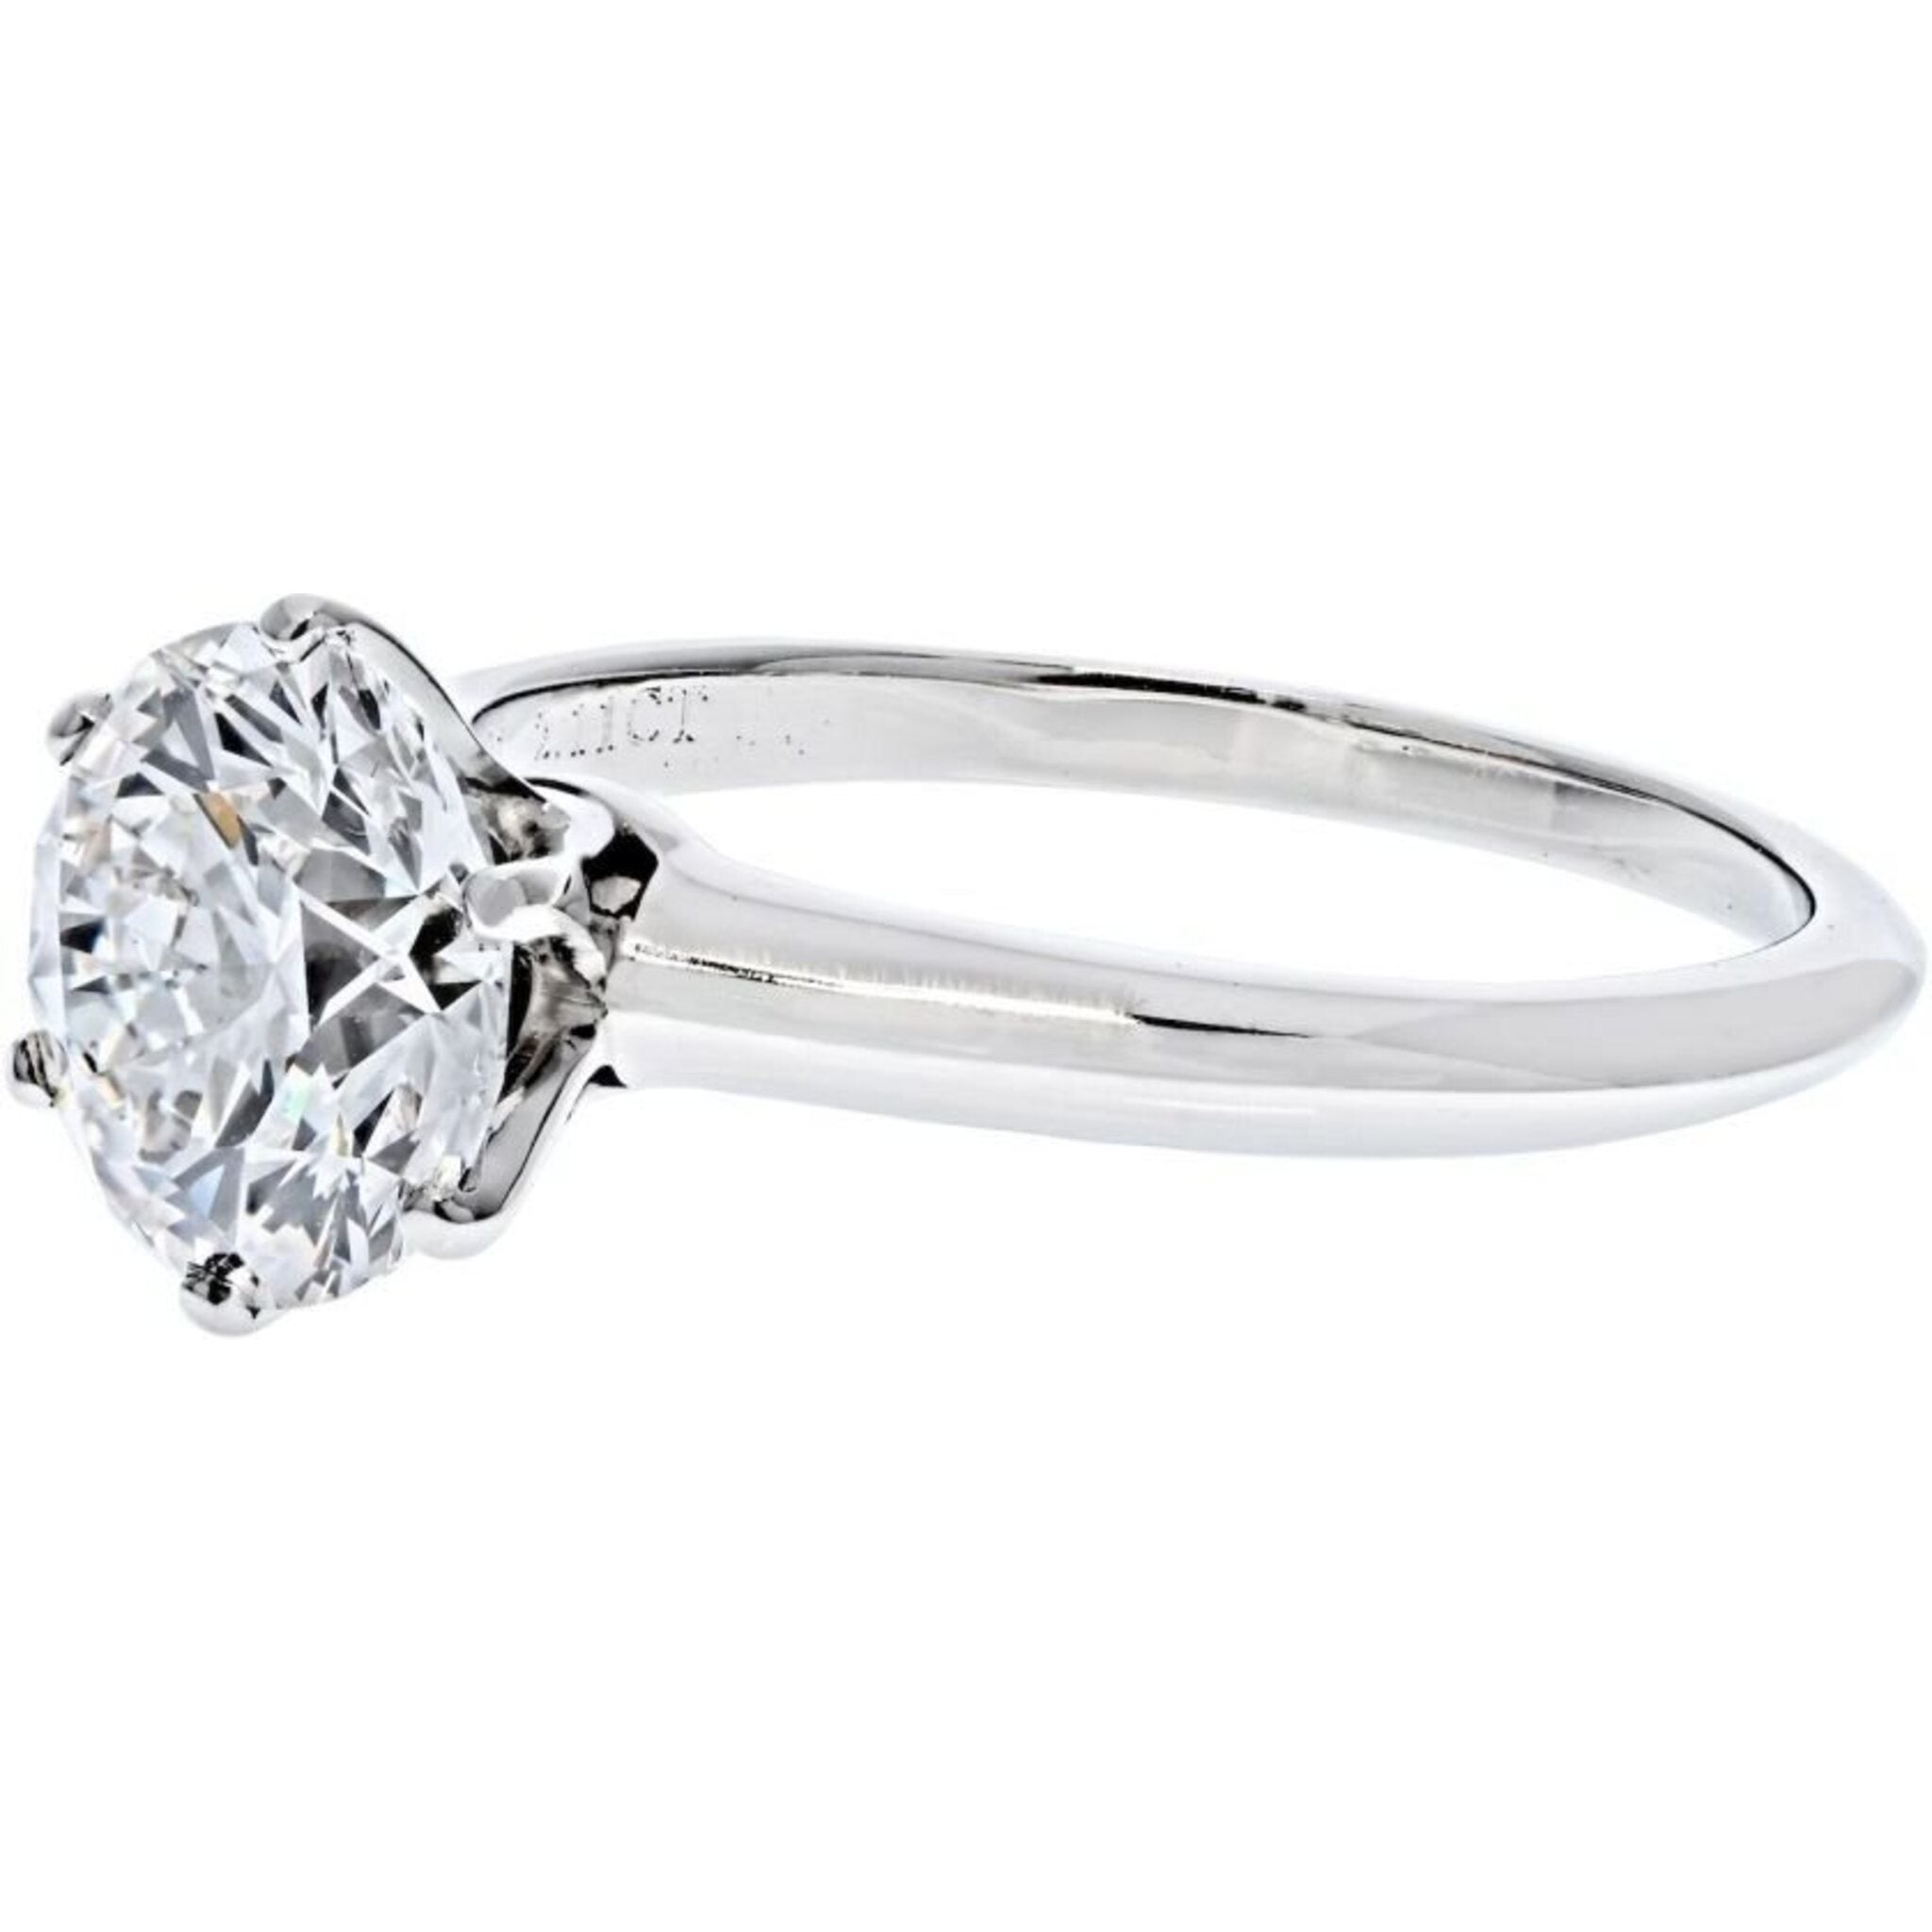 Tiffany Setting Engagement Rings: The Complete Guide